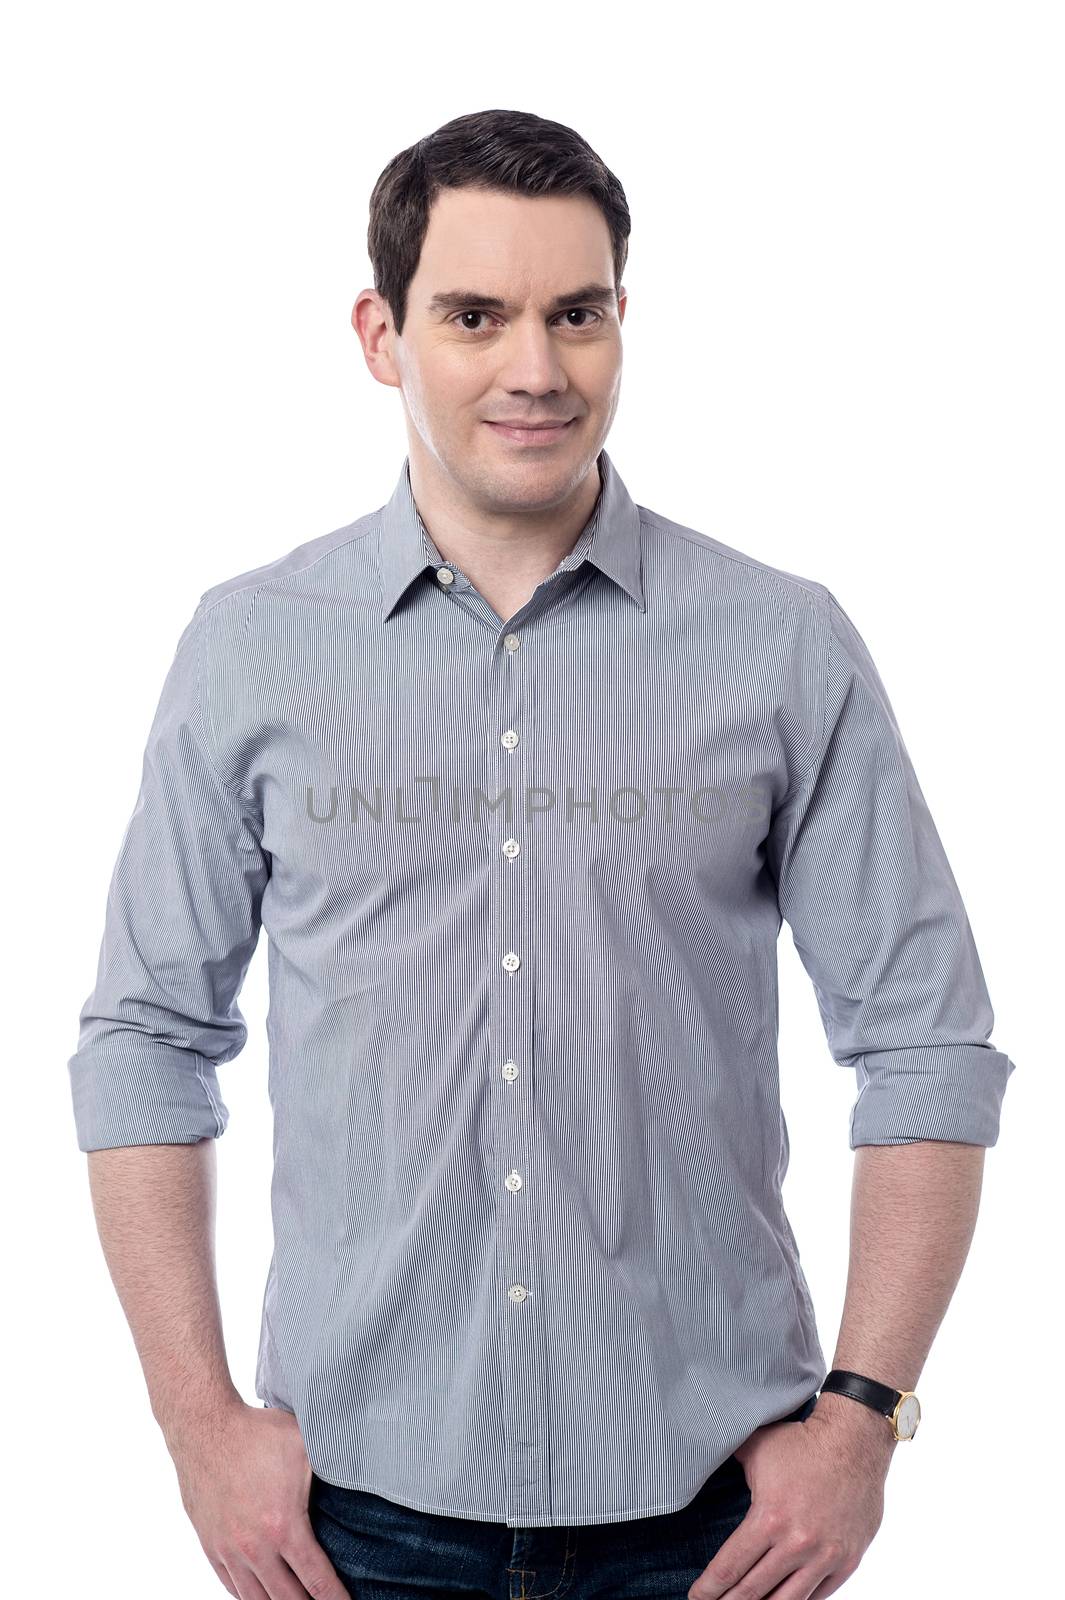 Handsome middle aged man posing by stockyimages